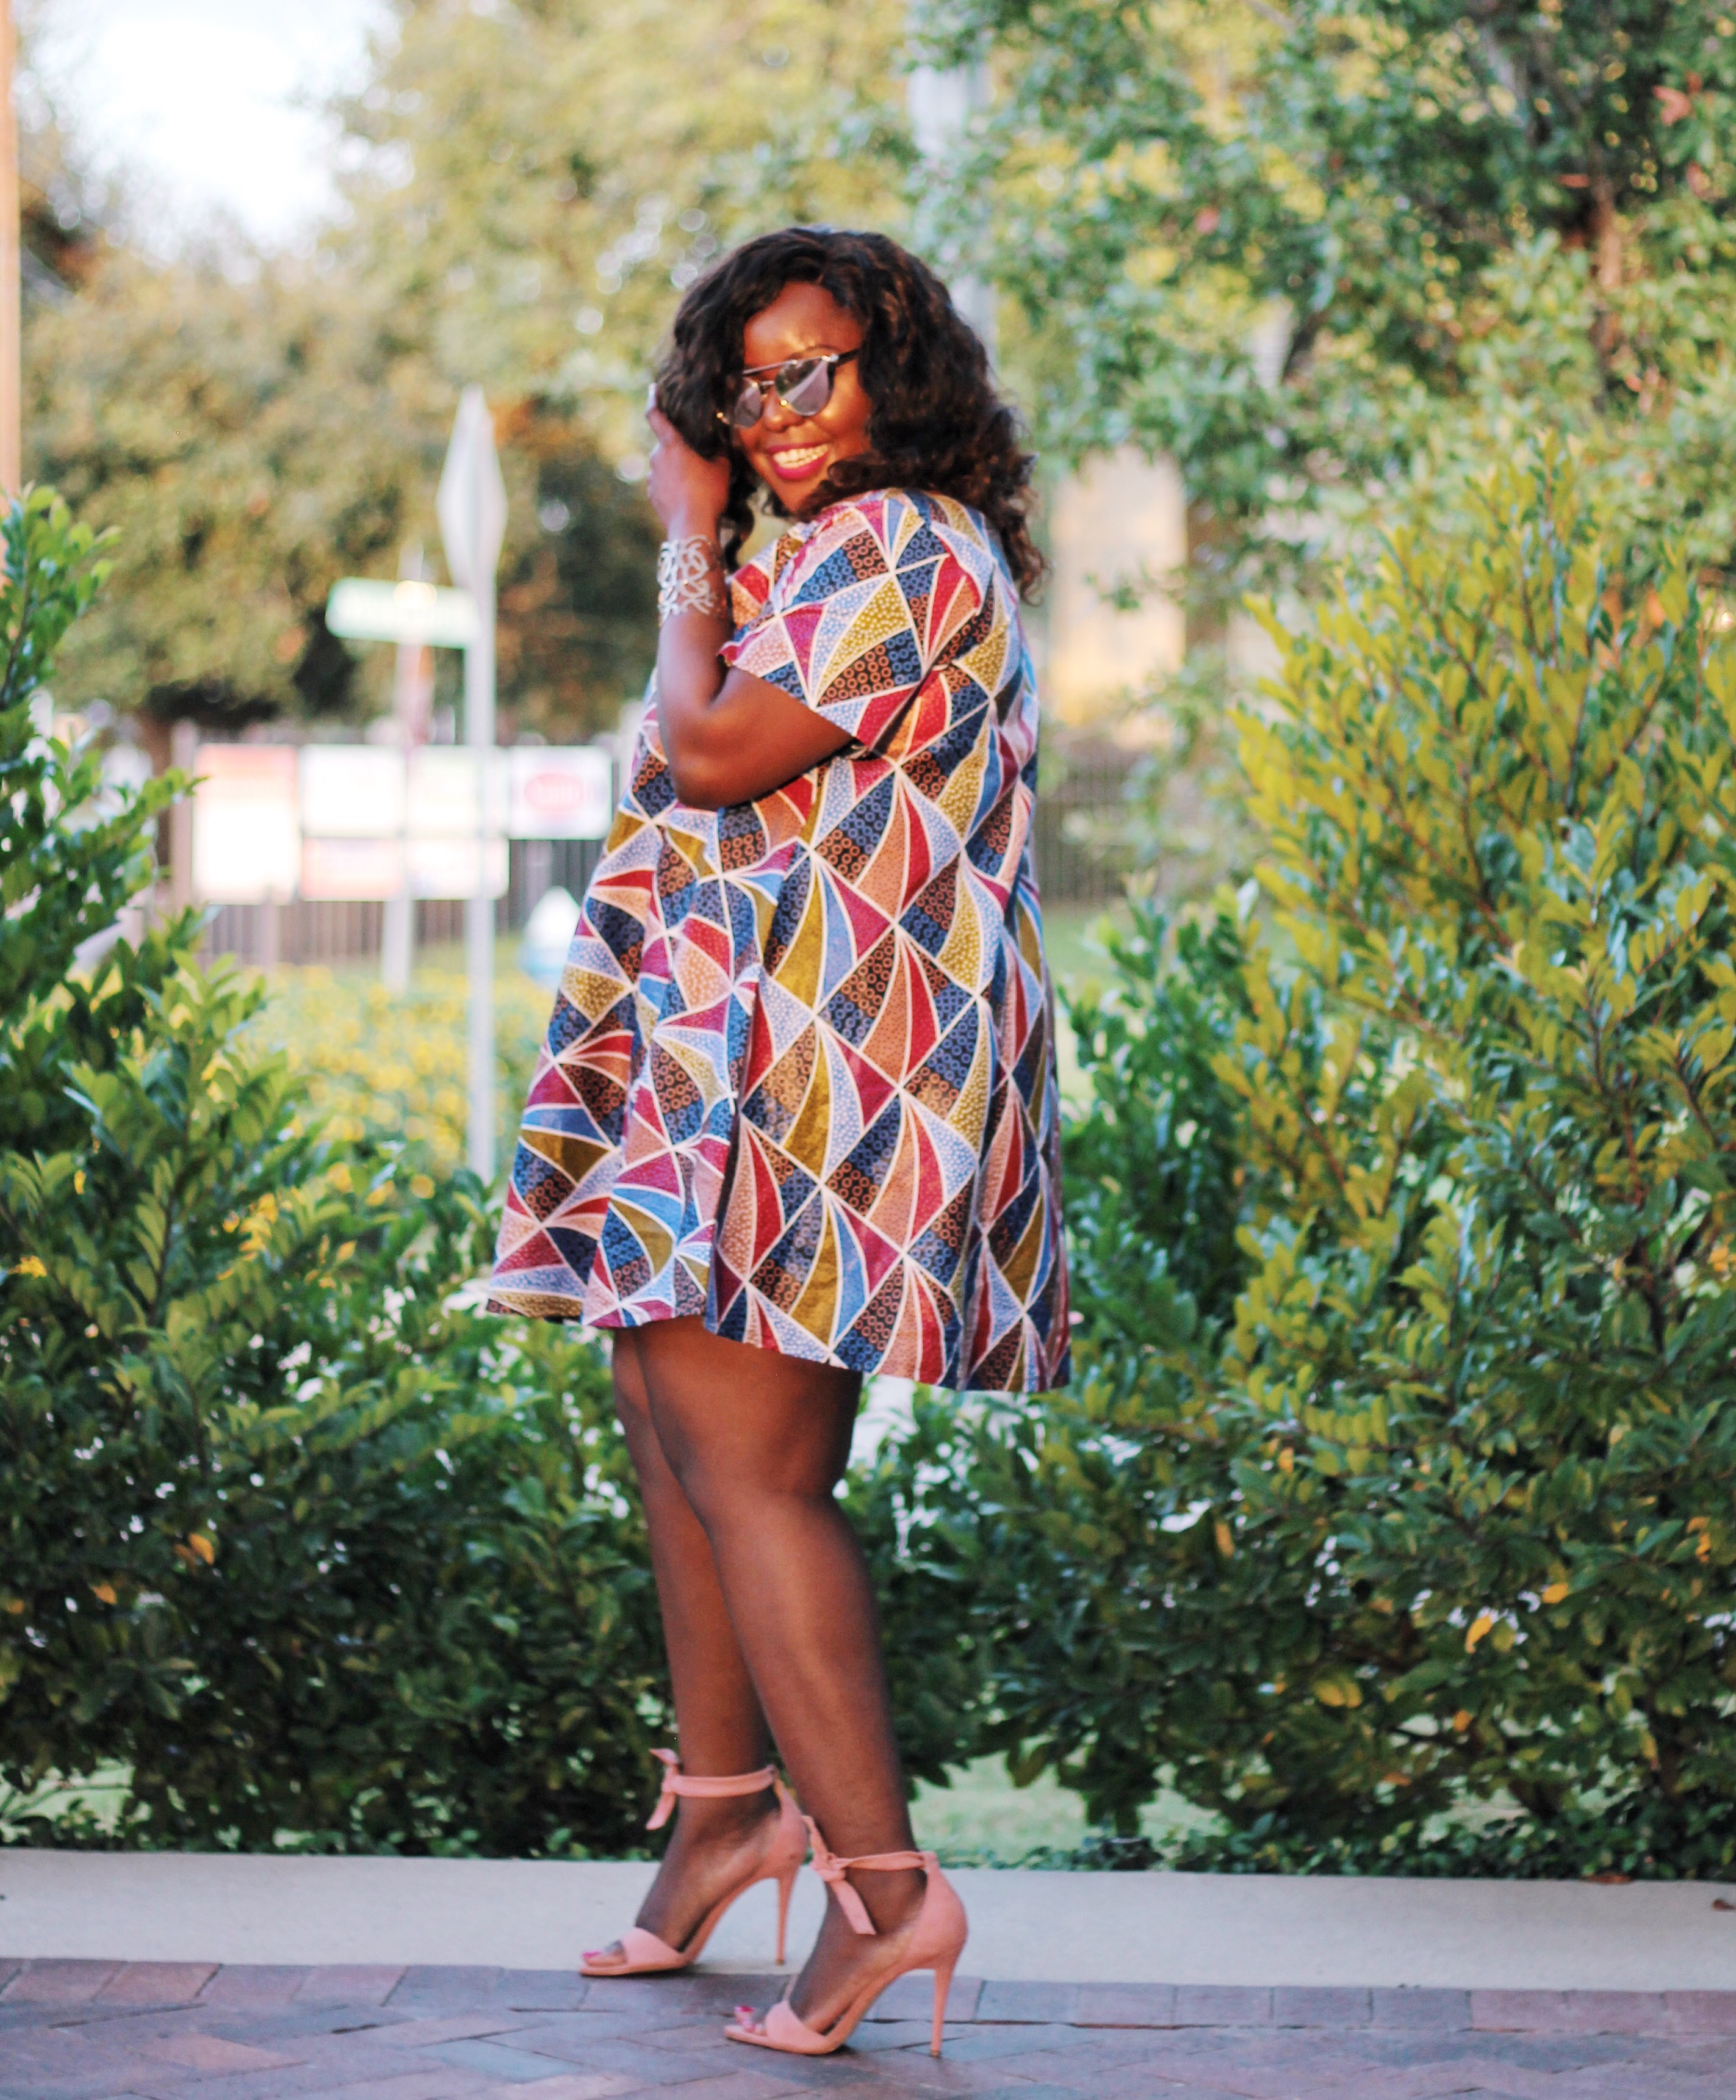 asos curve bloggers, beautiful curvy girls, curvy style dark skin fashion blogger curvy style blogger, dark skin beauty blogger, dark skin blogger, houston blogger, inspiration for 2016, inspiring bloggers and blogs, new years resolutions, plus size blogger, quotes for 2016, relationship advice blogs, rules to live by in the new year, texas blogger, travel blogger, ugandan blogger, ugandan fashionista, ugandan style blogger, african print ankara skirt styles, where to get african print clothes in America and uk, exposure african crafts in kampala uganda, kyaligonza kampala african material, Steve Madden Bowwtye Heel Sandal